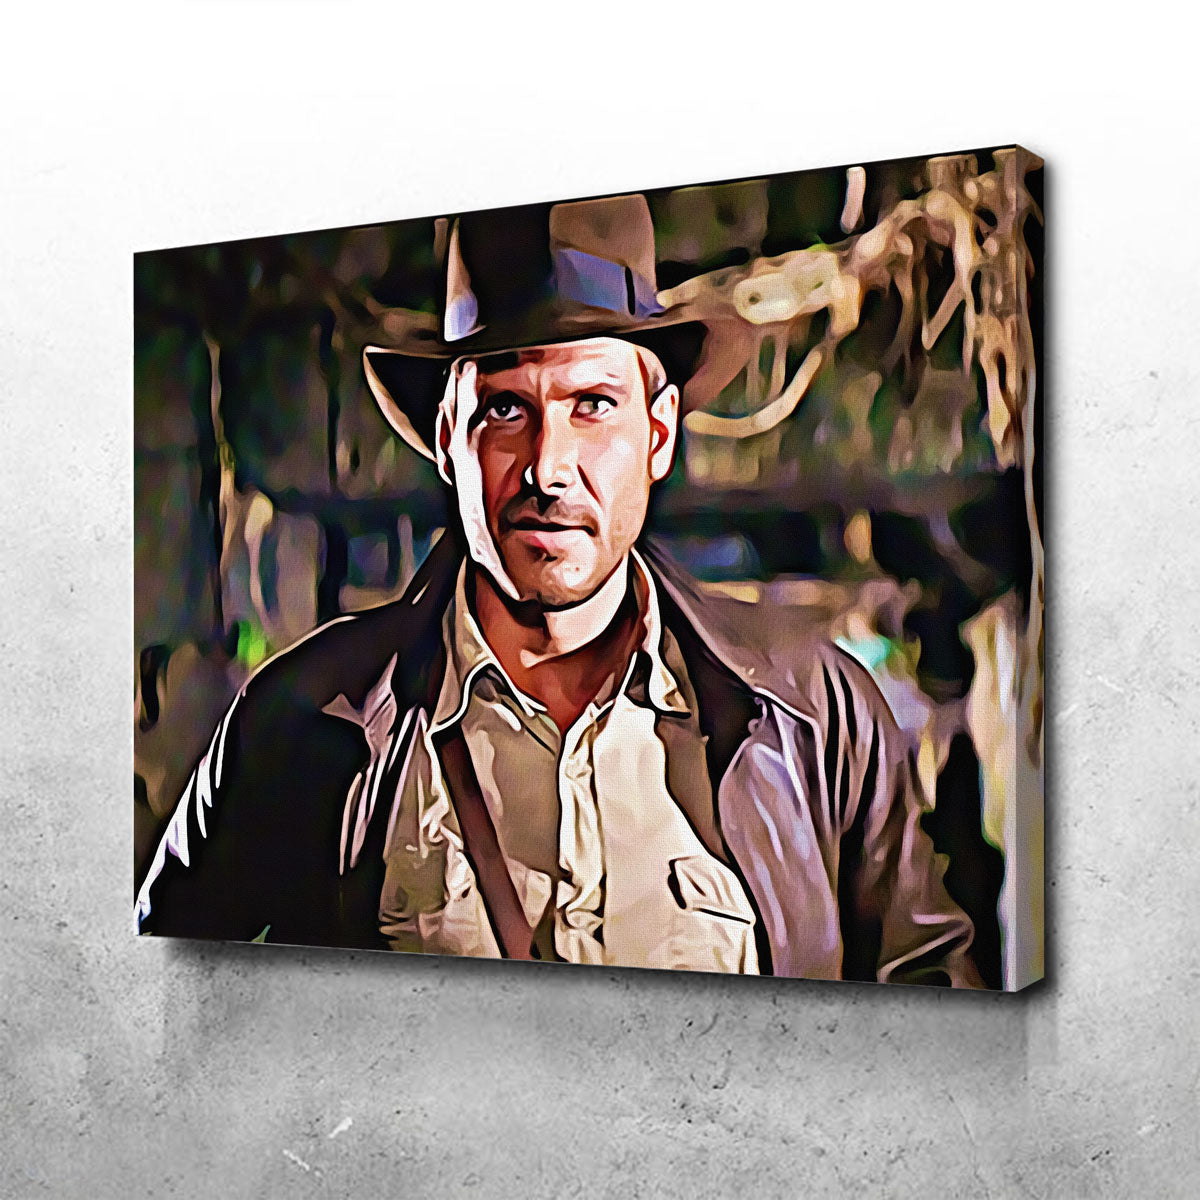 Raiders of the Lost Ark Canvas Set